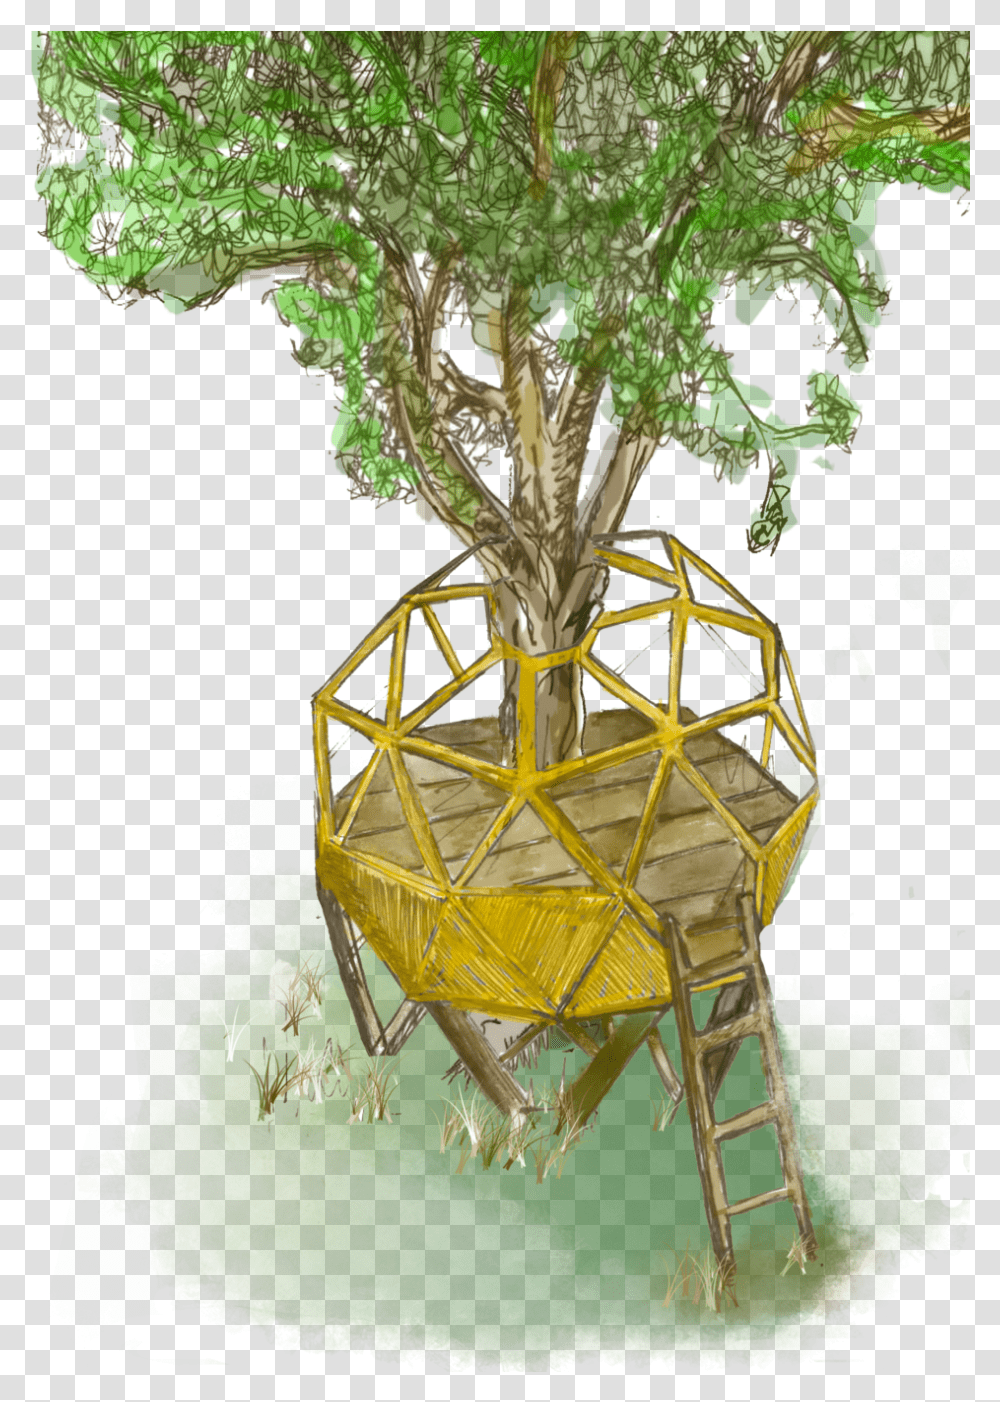 Download Treehouse Image With No Tree House, Plant, Bird, Animal Transparent Png